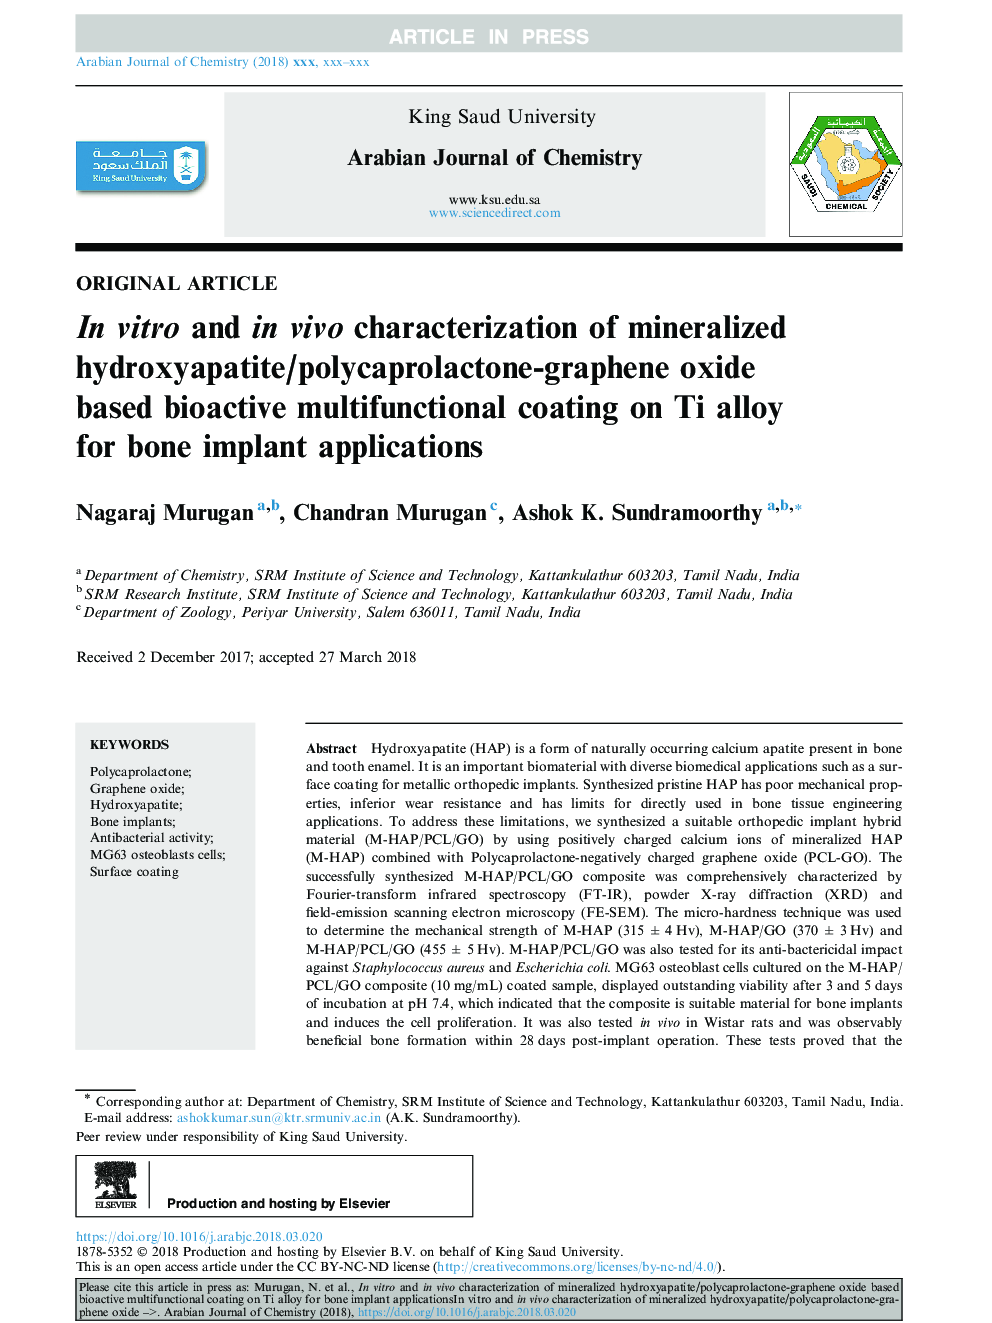 In vitro and in vivo characterization of mineralized hydroxyapatite/polycaprolactone-graphene oxide based bioactive multifunctional coating on Ti alloy for bone implant applications